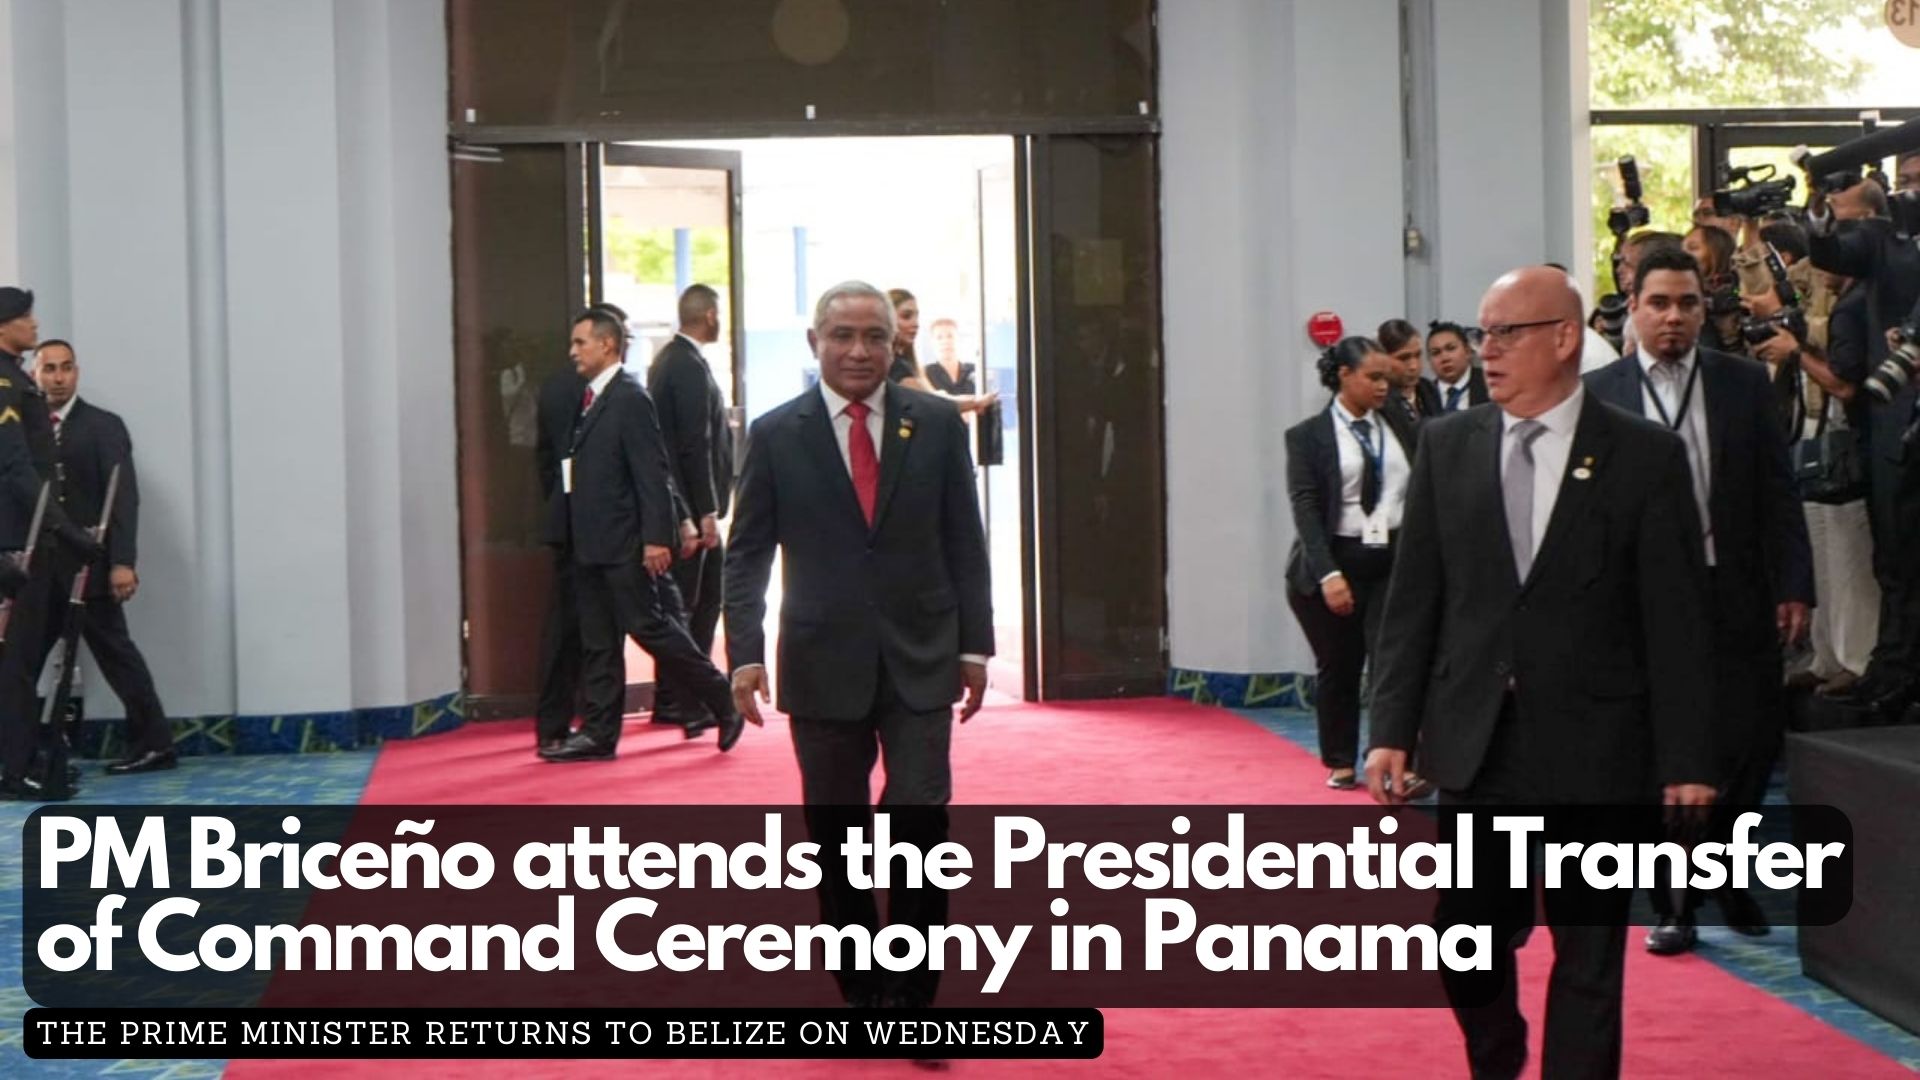 Prime Minister attends the Presidential Transfer of Command Ceremony in Panama